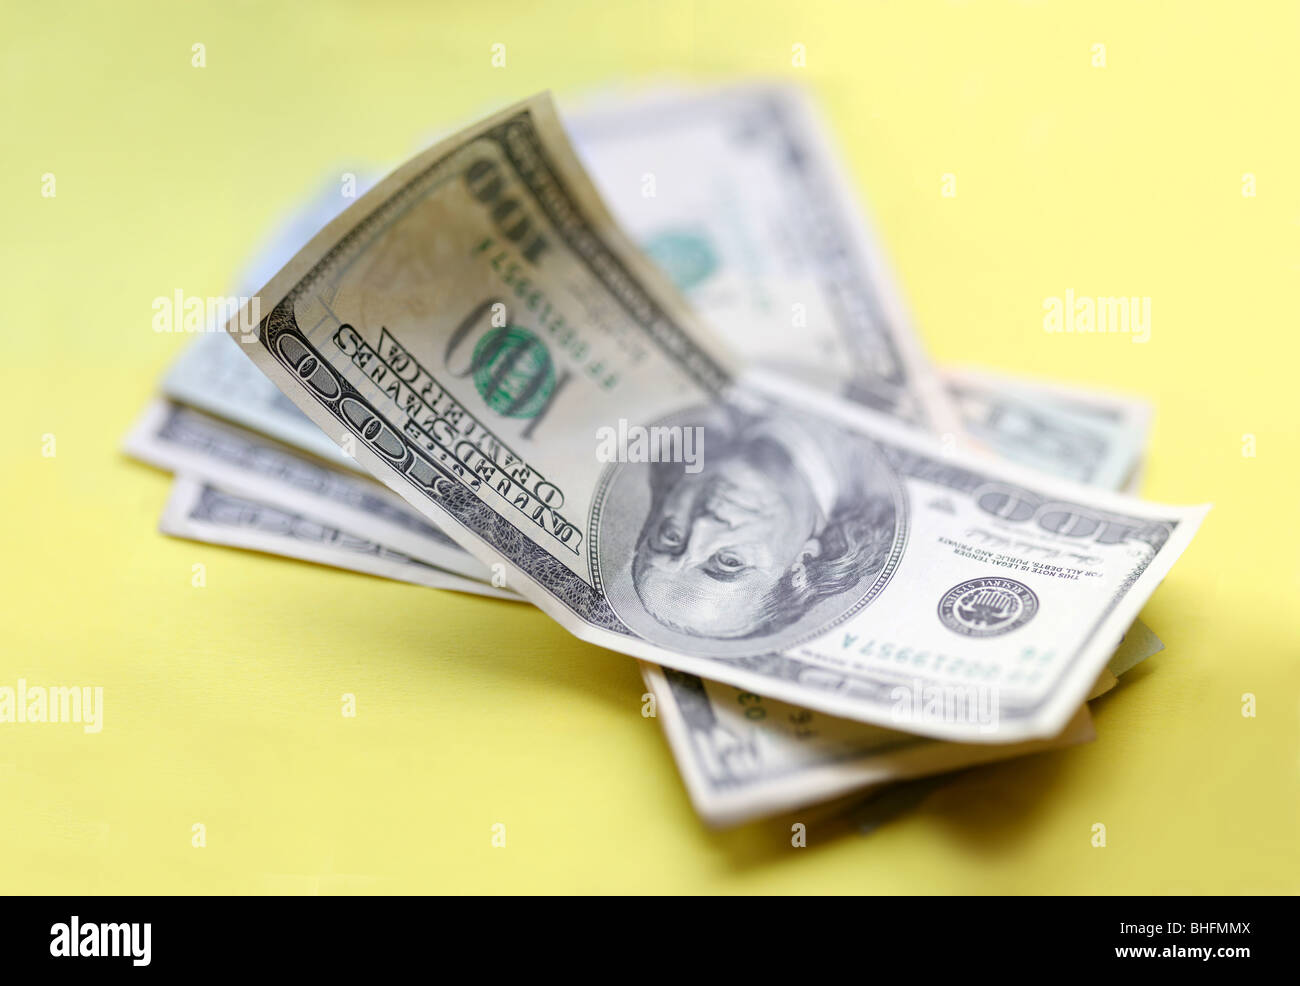 Dollars. Some piece of money over yellow background. Stock Photo